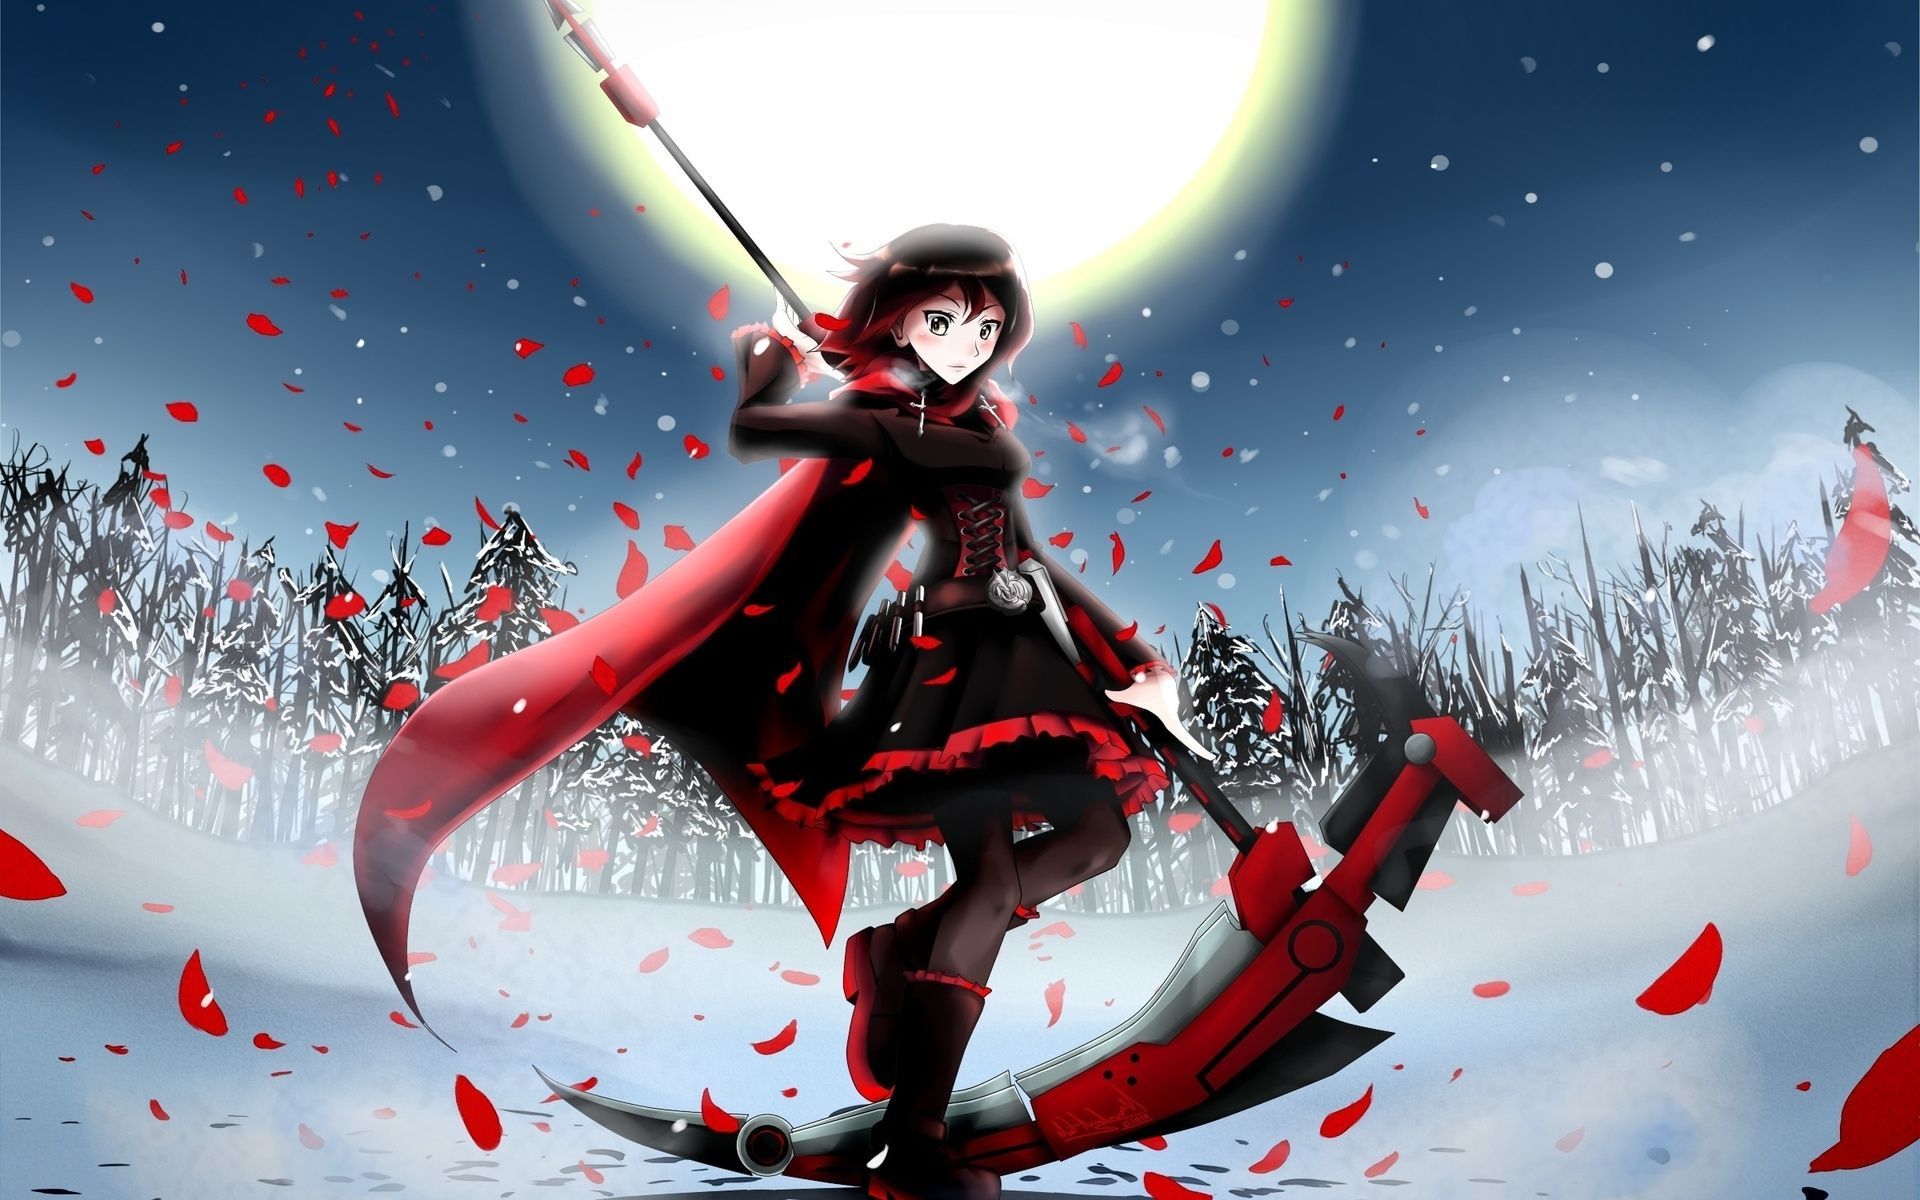 Ruby Rose Wallpaper Rwby Ruby Rose 4k Wallpapers Showtainment